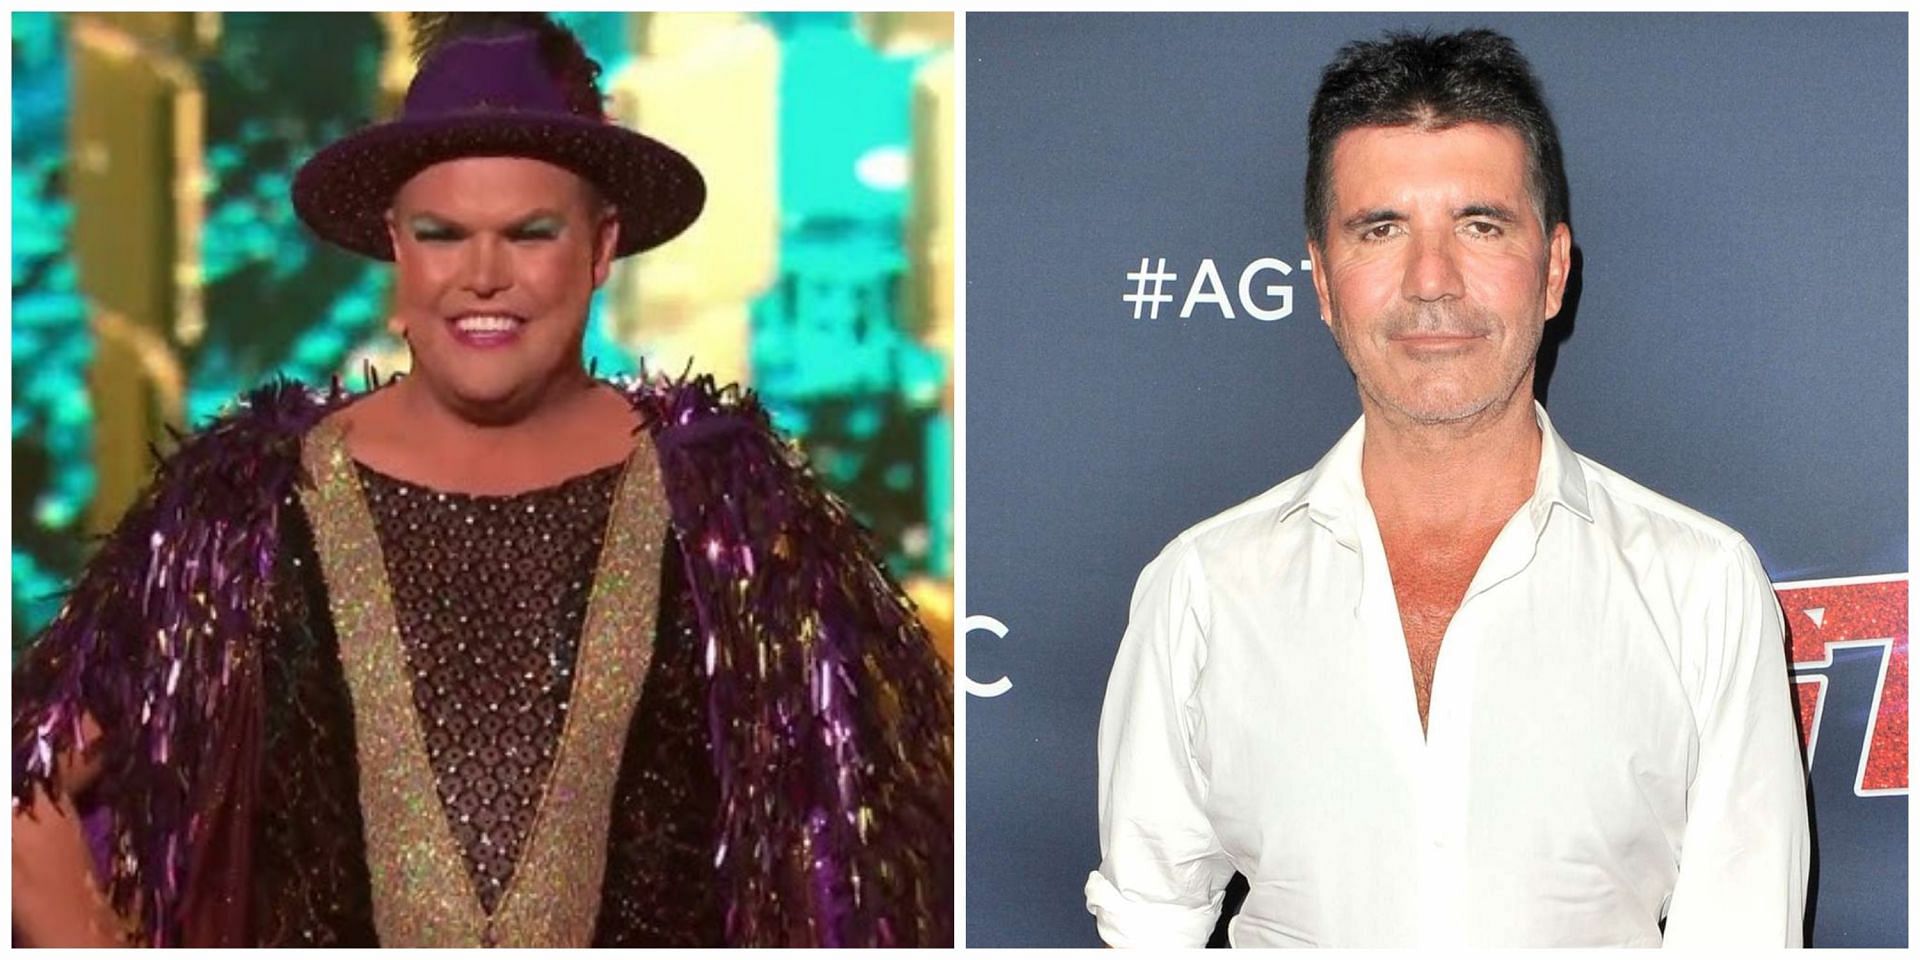 Simon Cowell and a contestant get into an argument on AGT: Fantasy League. (Image via NBC)